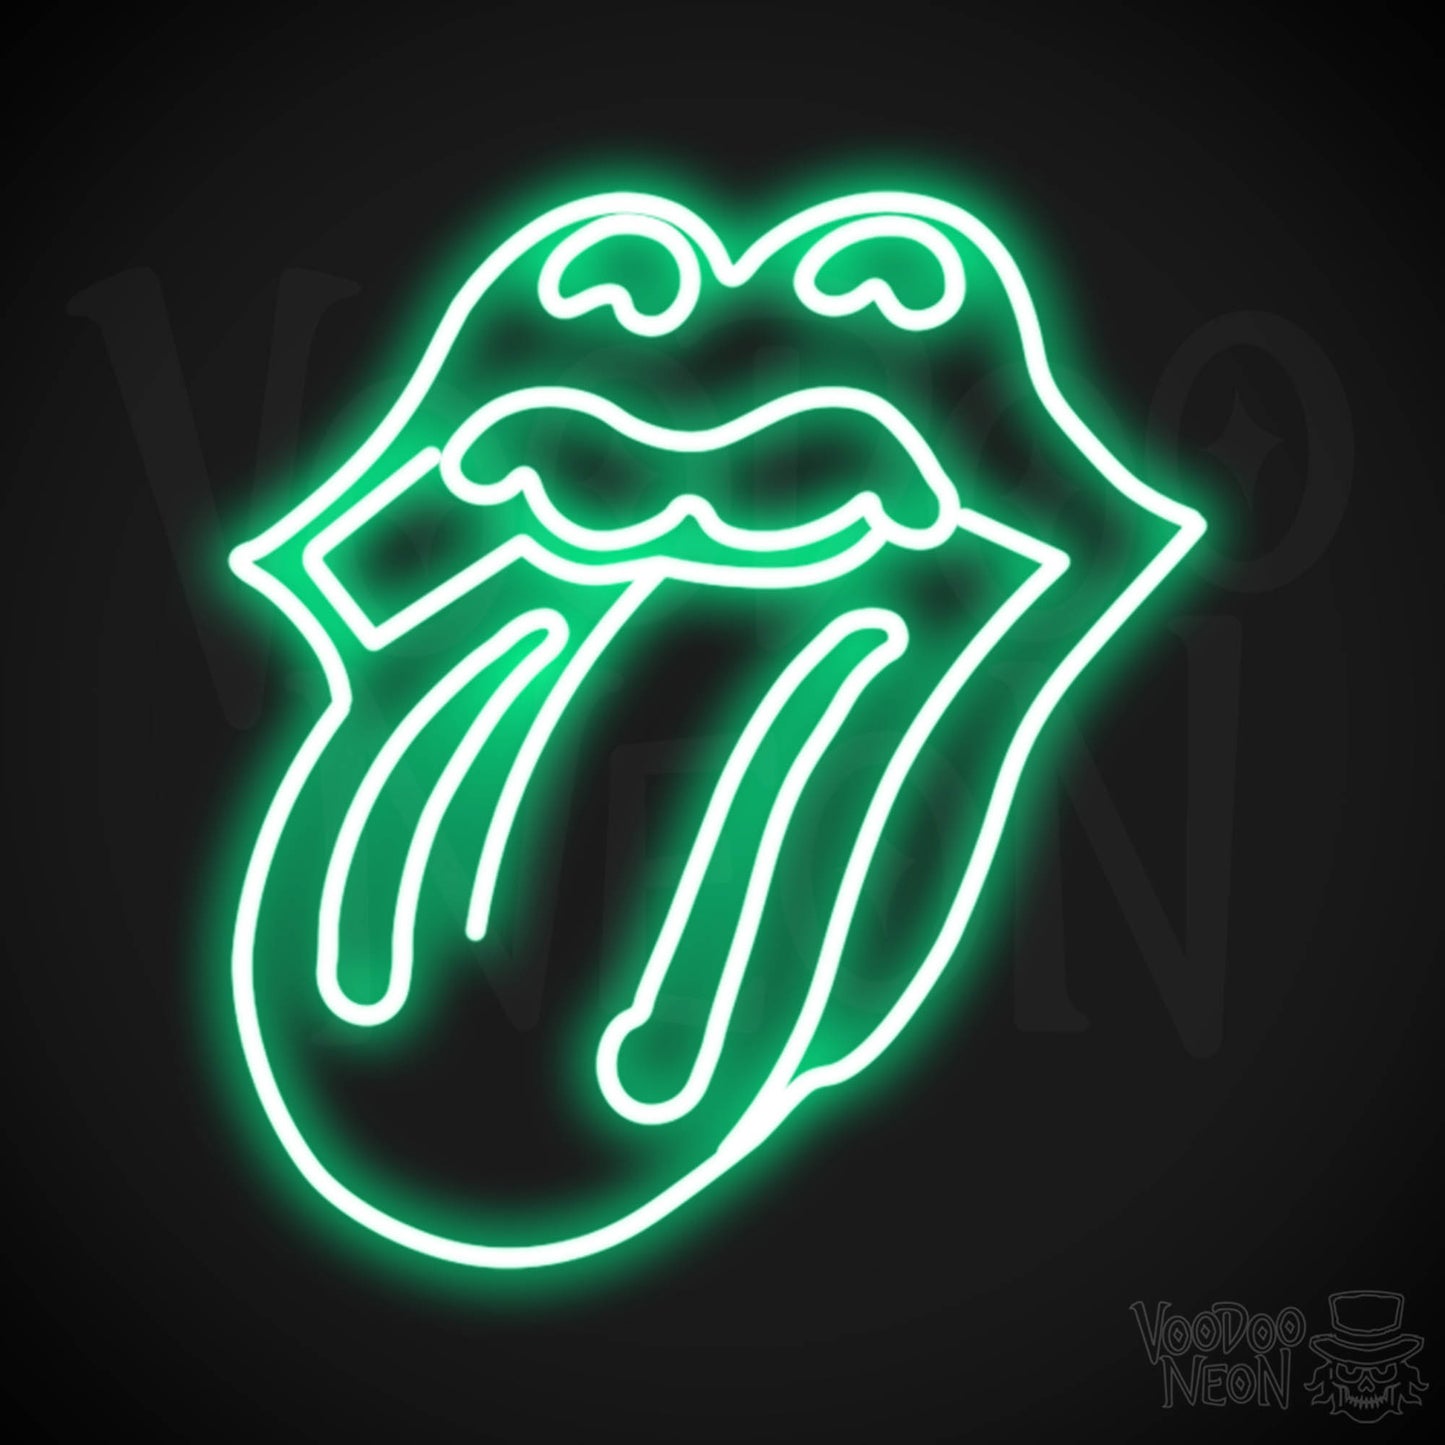 Rolling Stones Neon Sign - Rolling Stones Sign - Neon Rolling Stones Logo Wall Art - Color Green